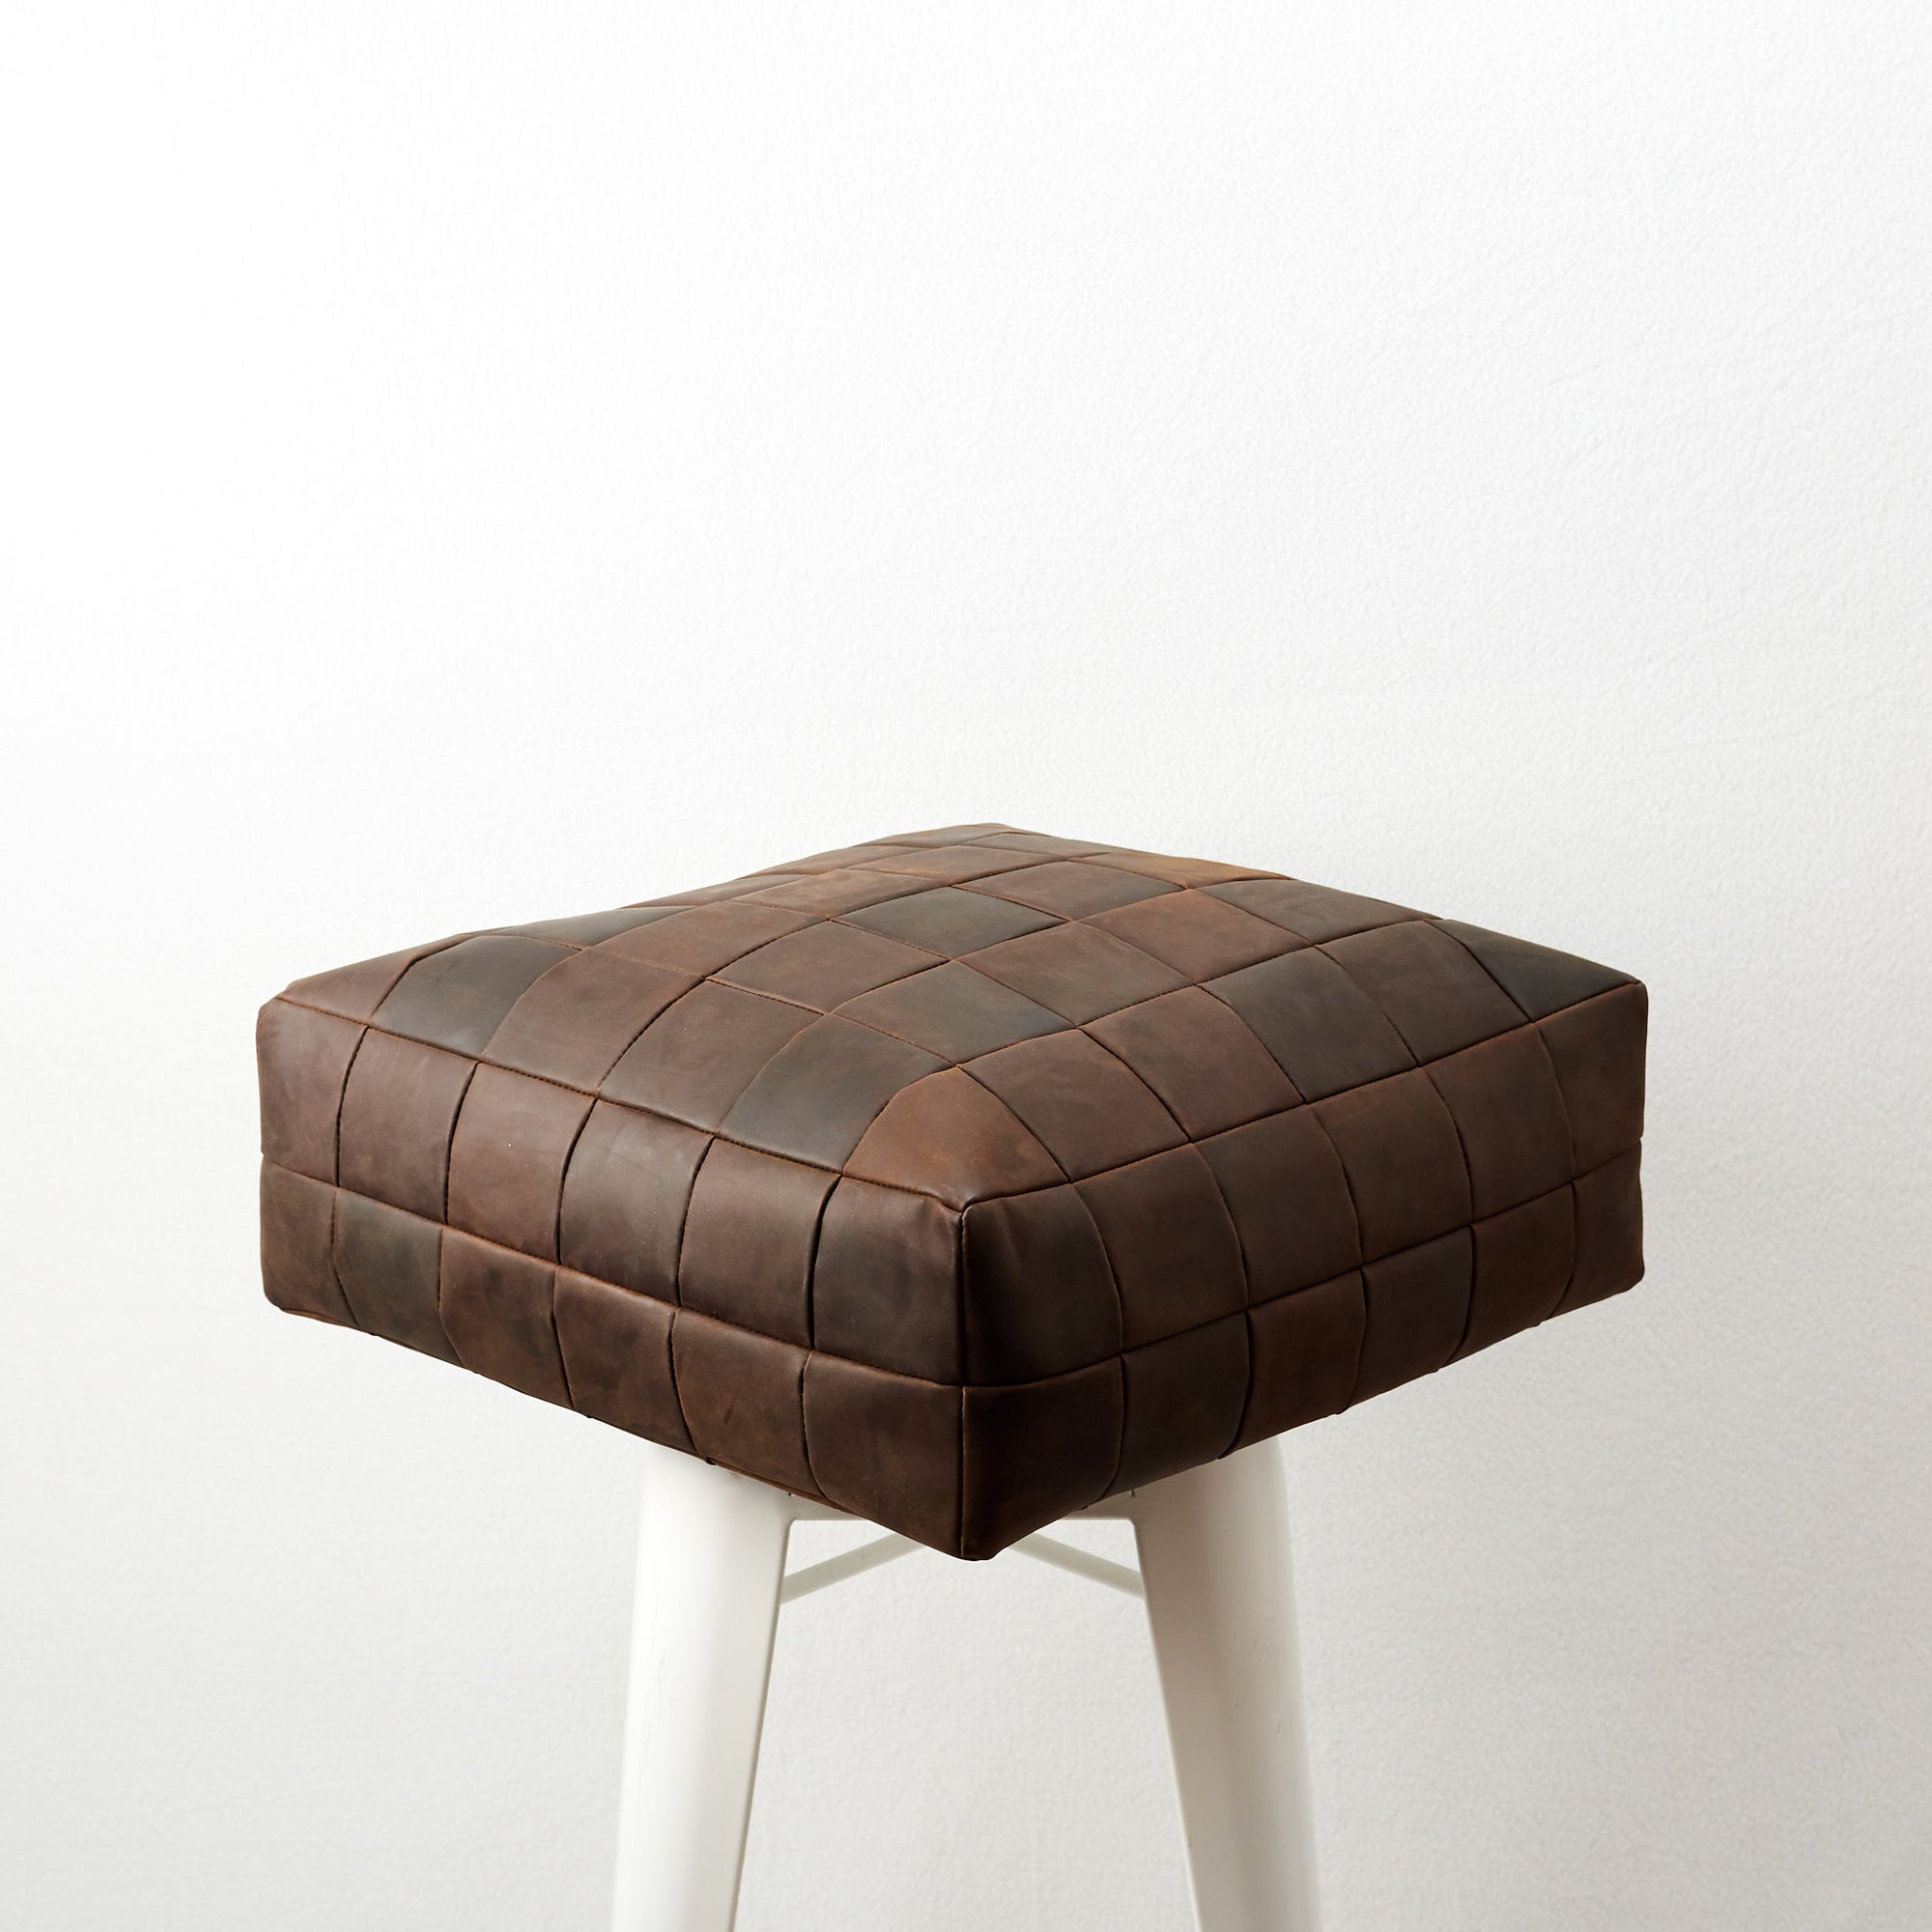 Brown Leather floor cushion pillow for home furniture.